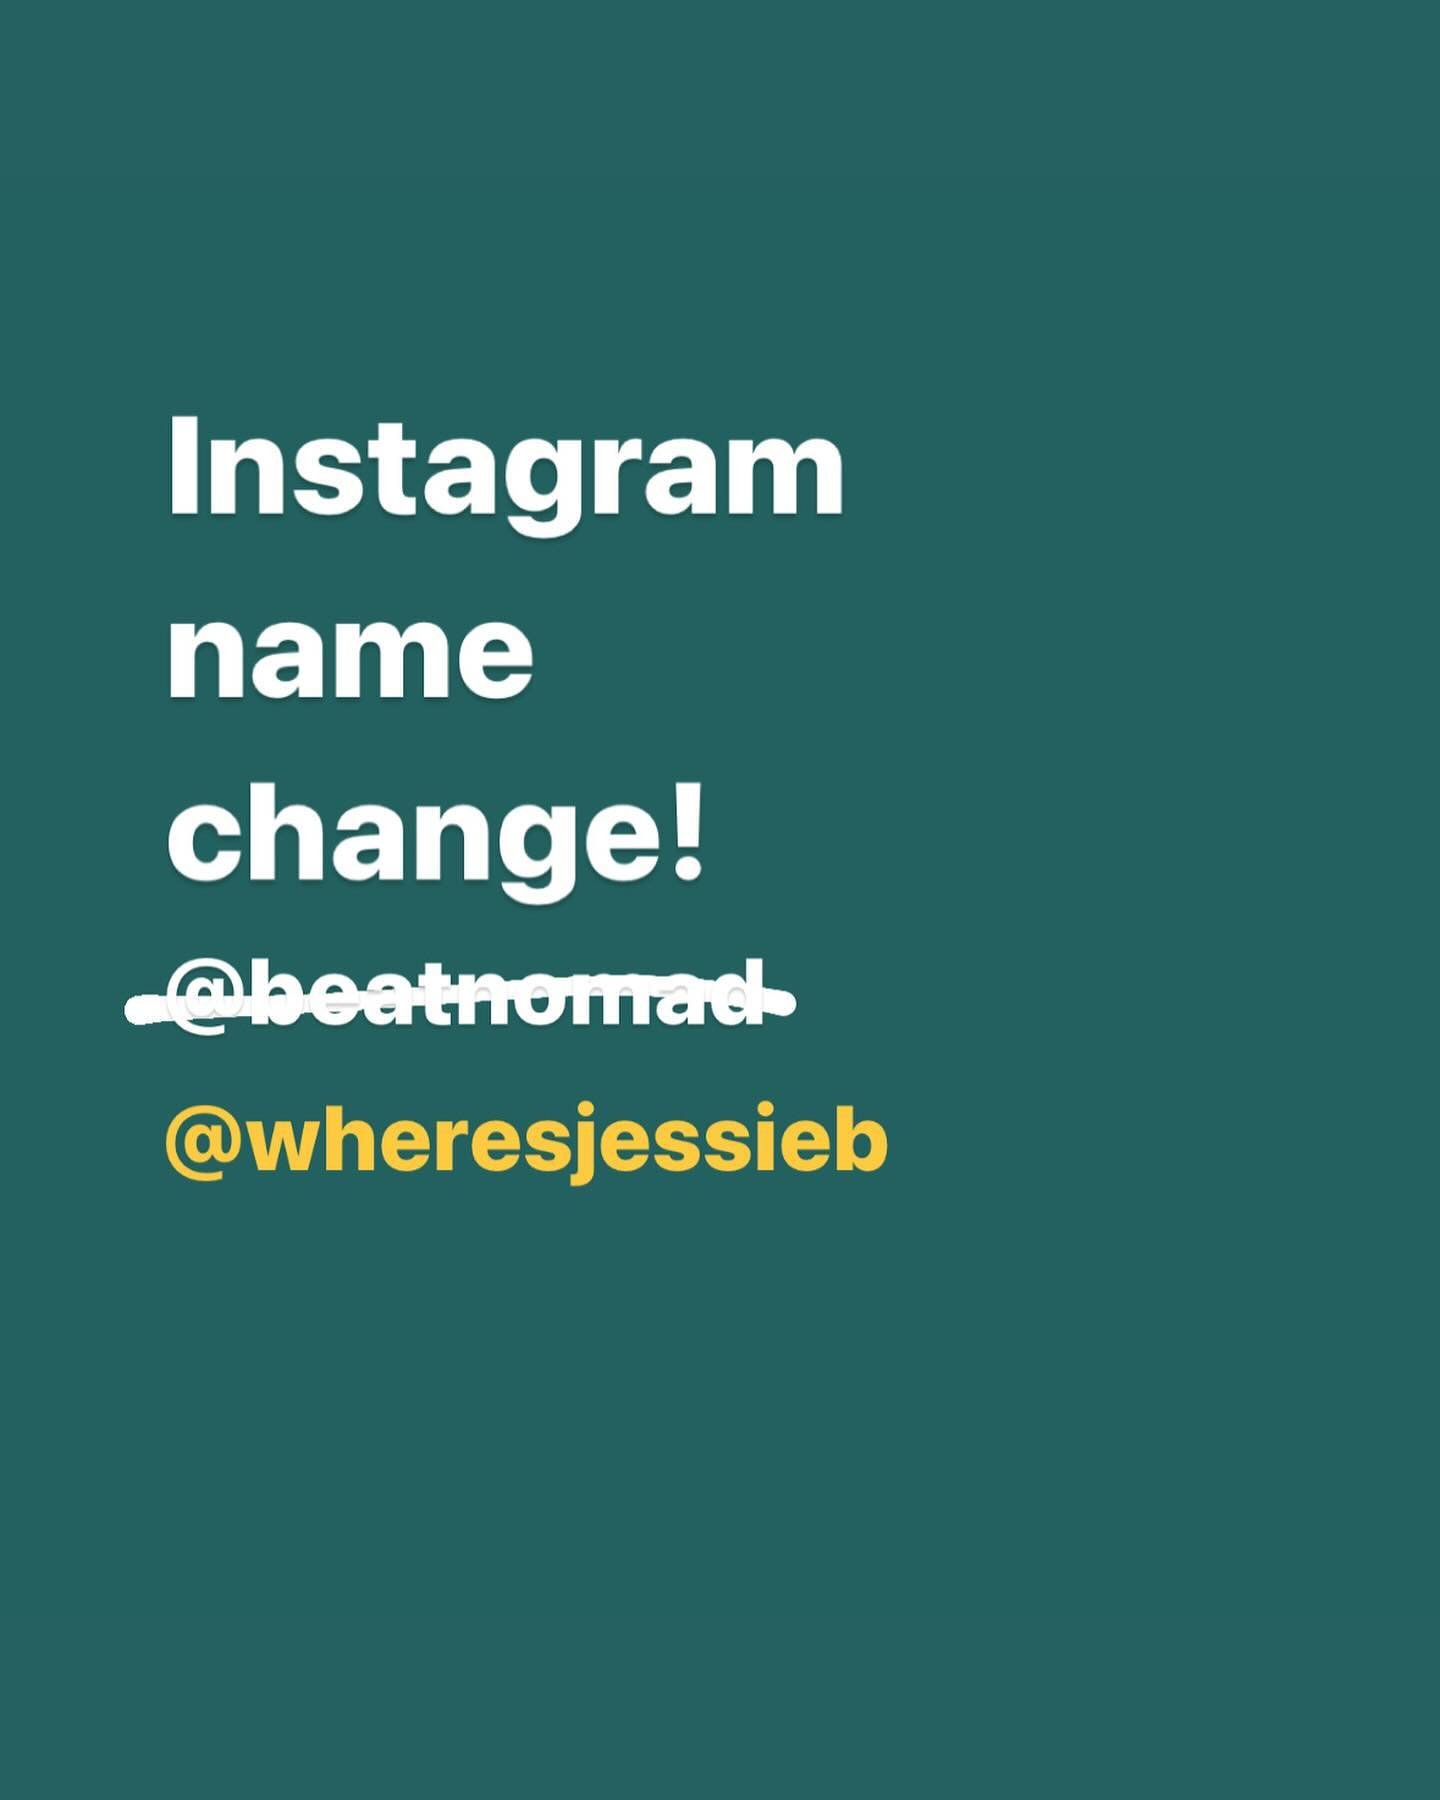 Friends and followers: I&rsquo;m changing my IG handle from beatnomad to wheresjessieb. Although beatnomad has been a fun identity over the past 13 (!!) years, I&rsquo;ve finally admitted that I&rsquo;ve  grown out of it.
.
I started that name while 